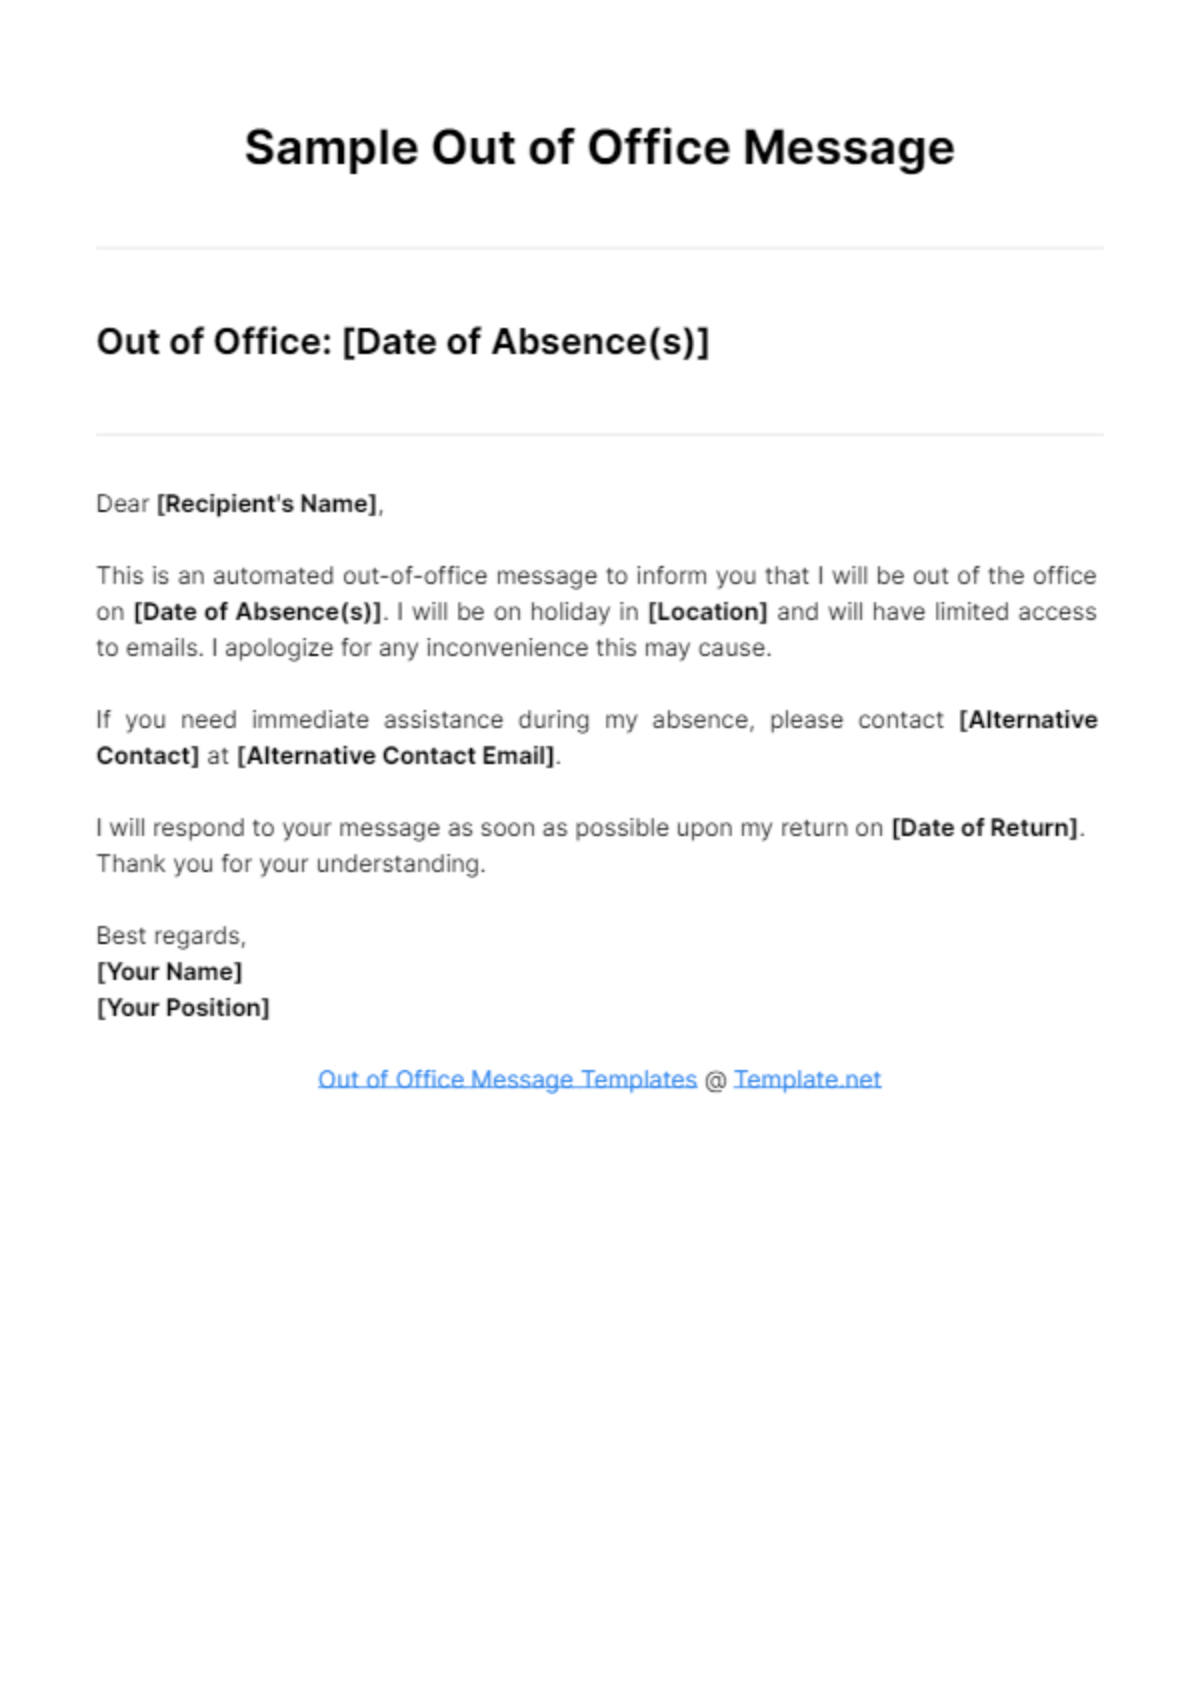 Sample Out of Office Message Template